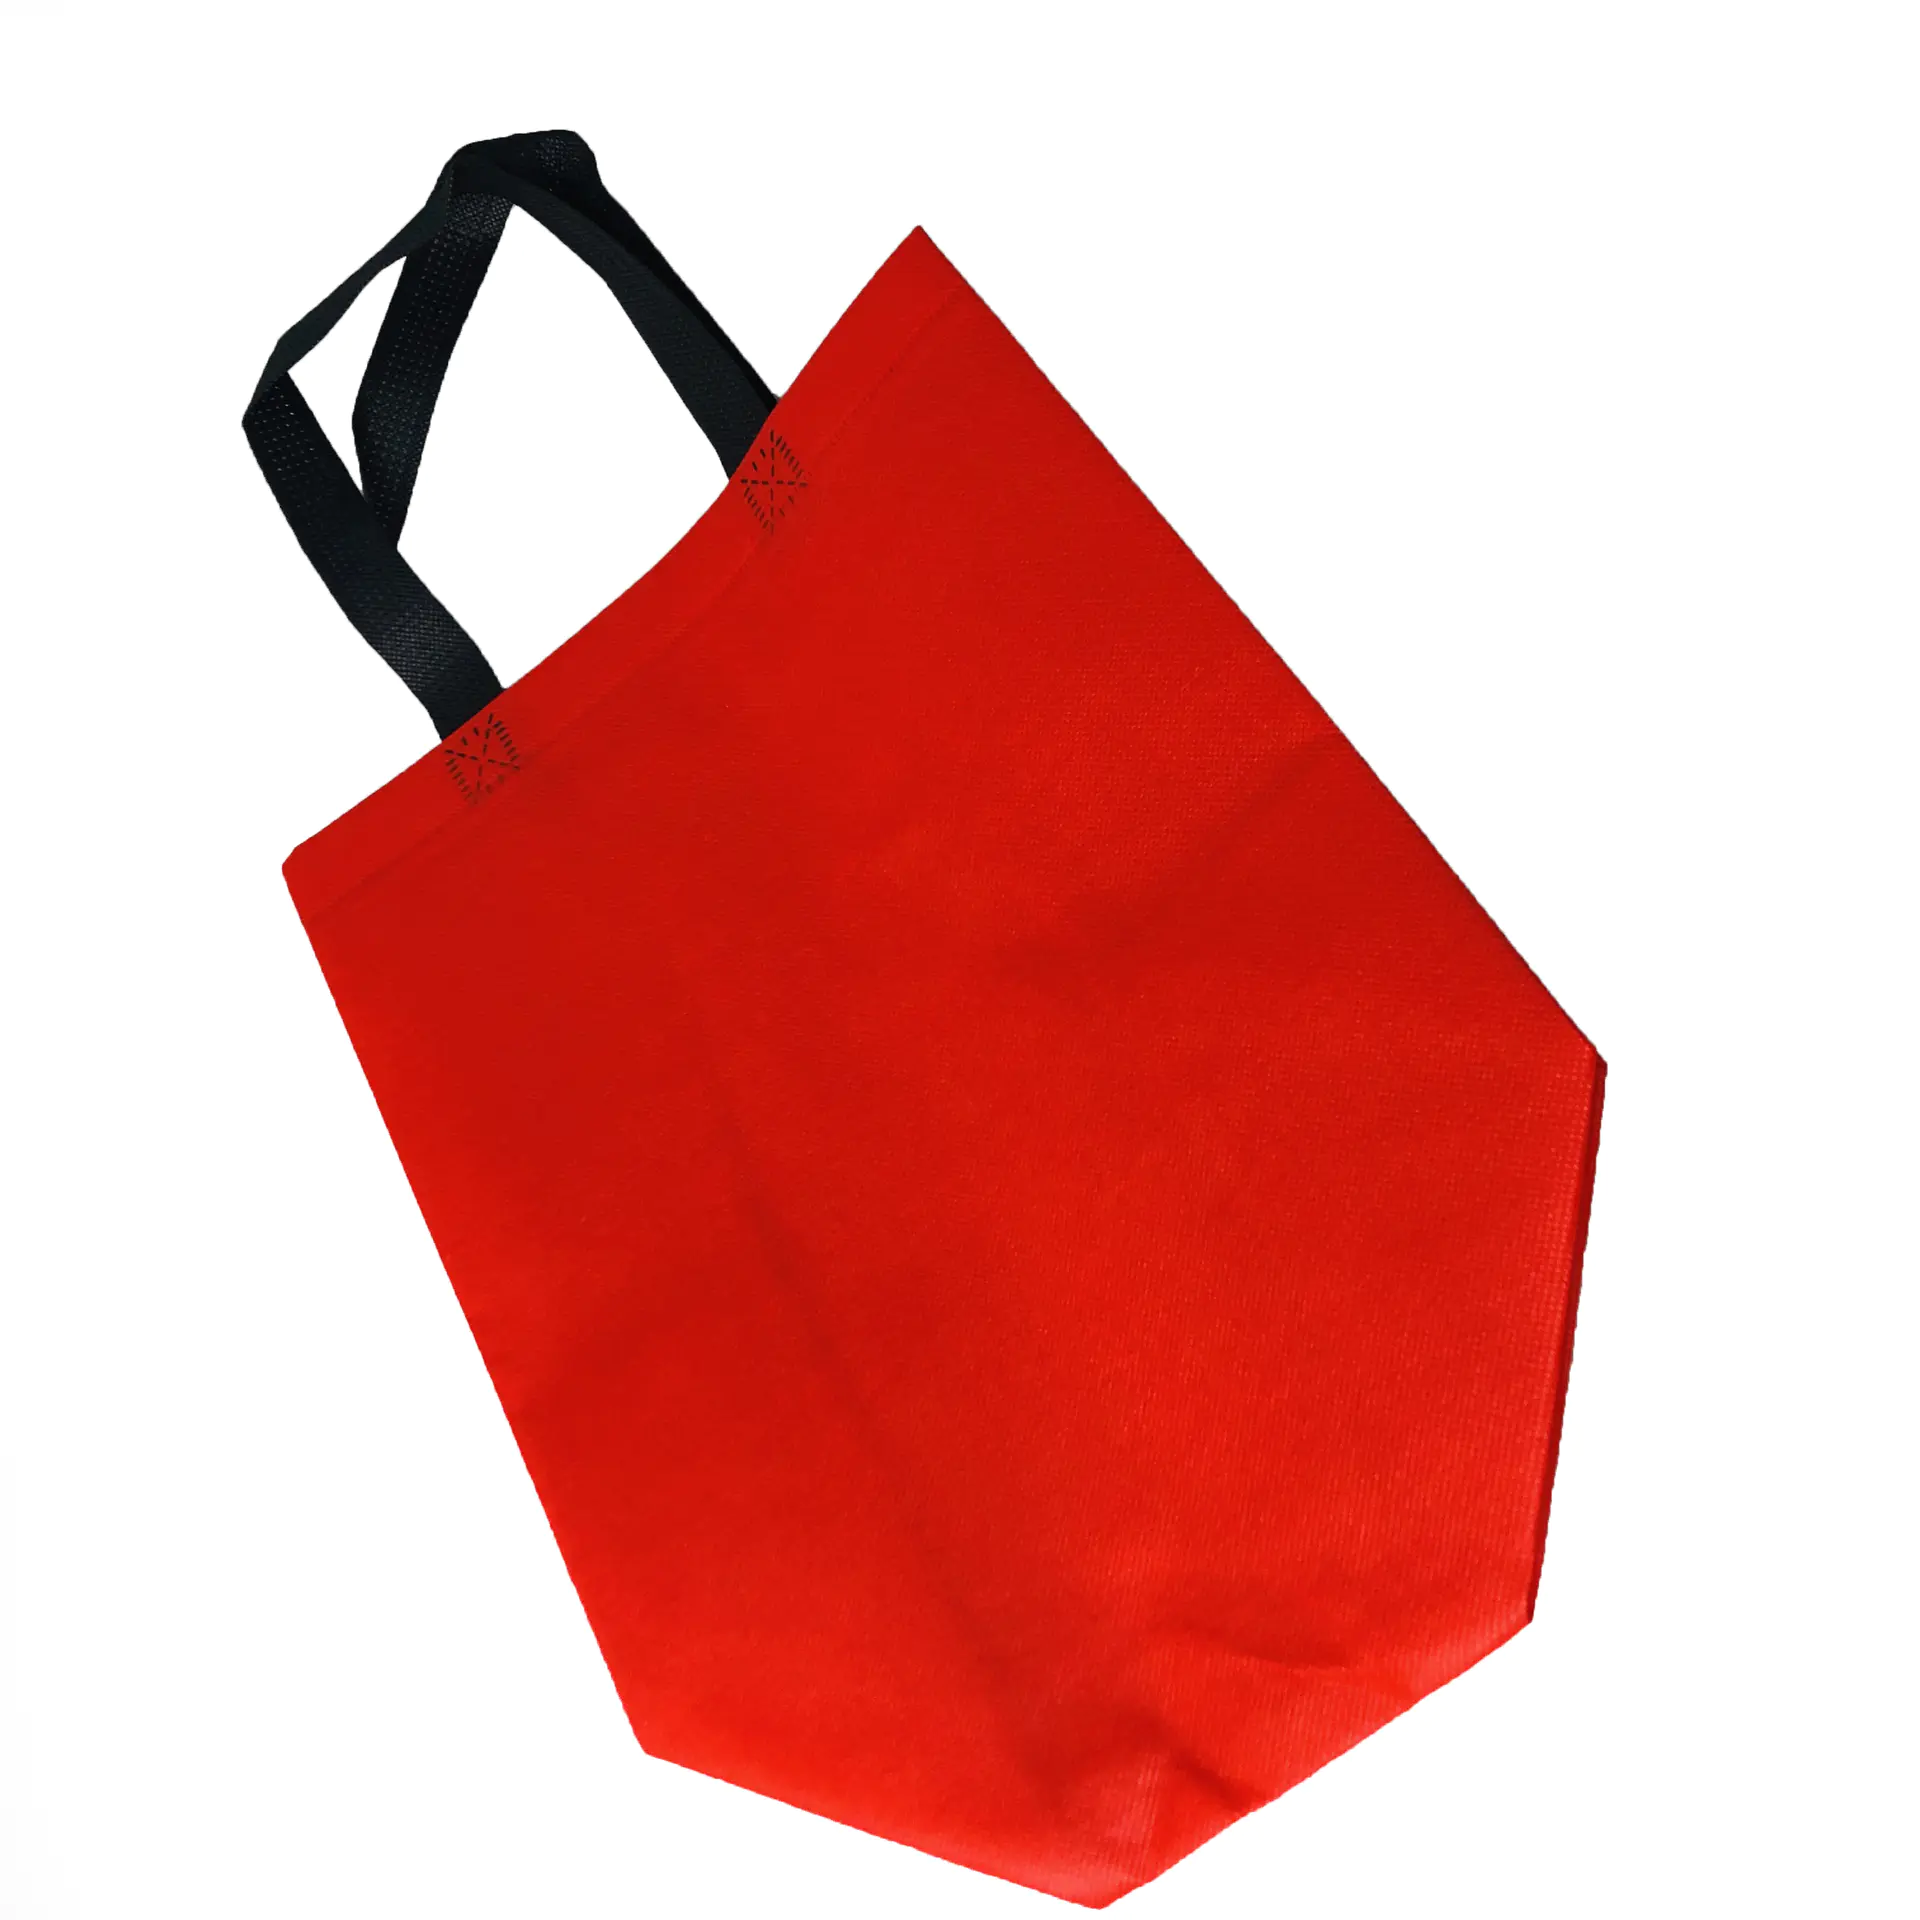 Factory low price direct selling pp spunbond non woven color handbag